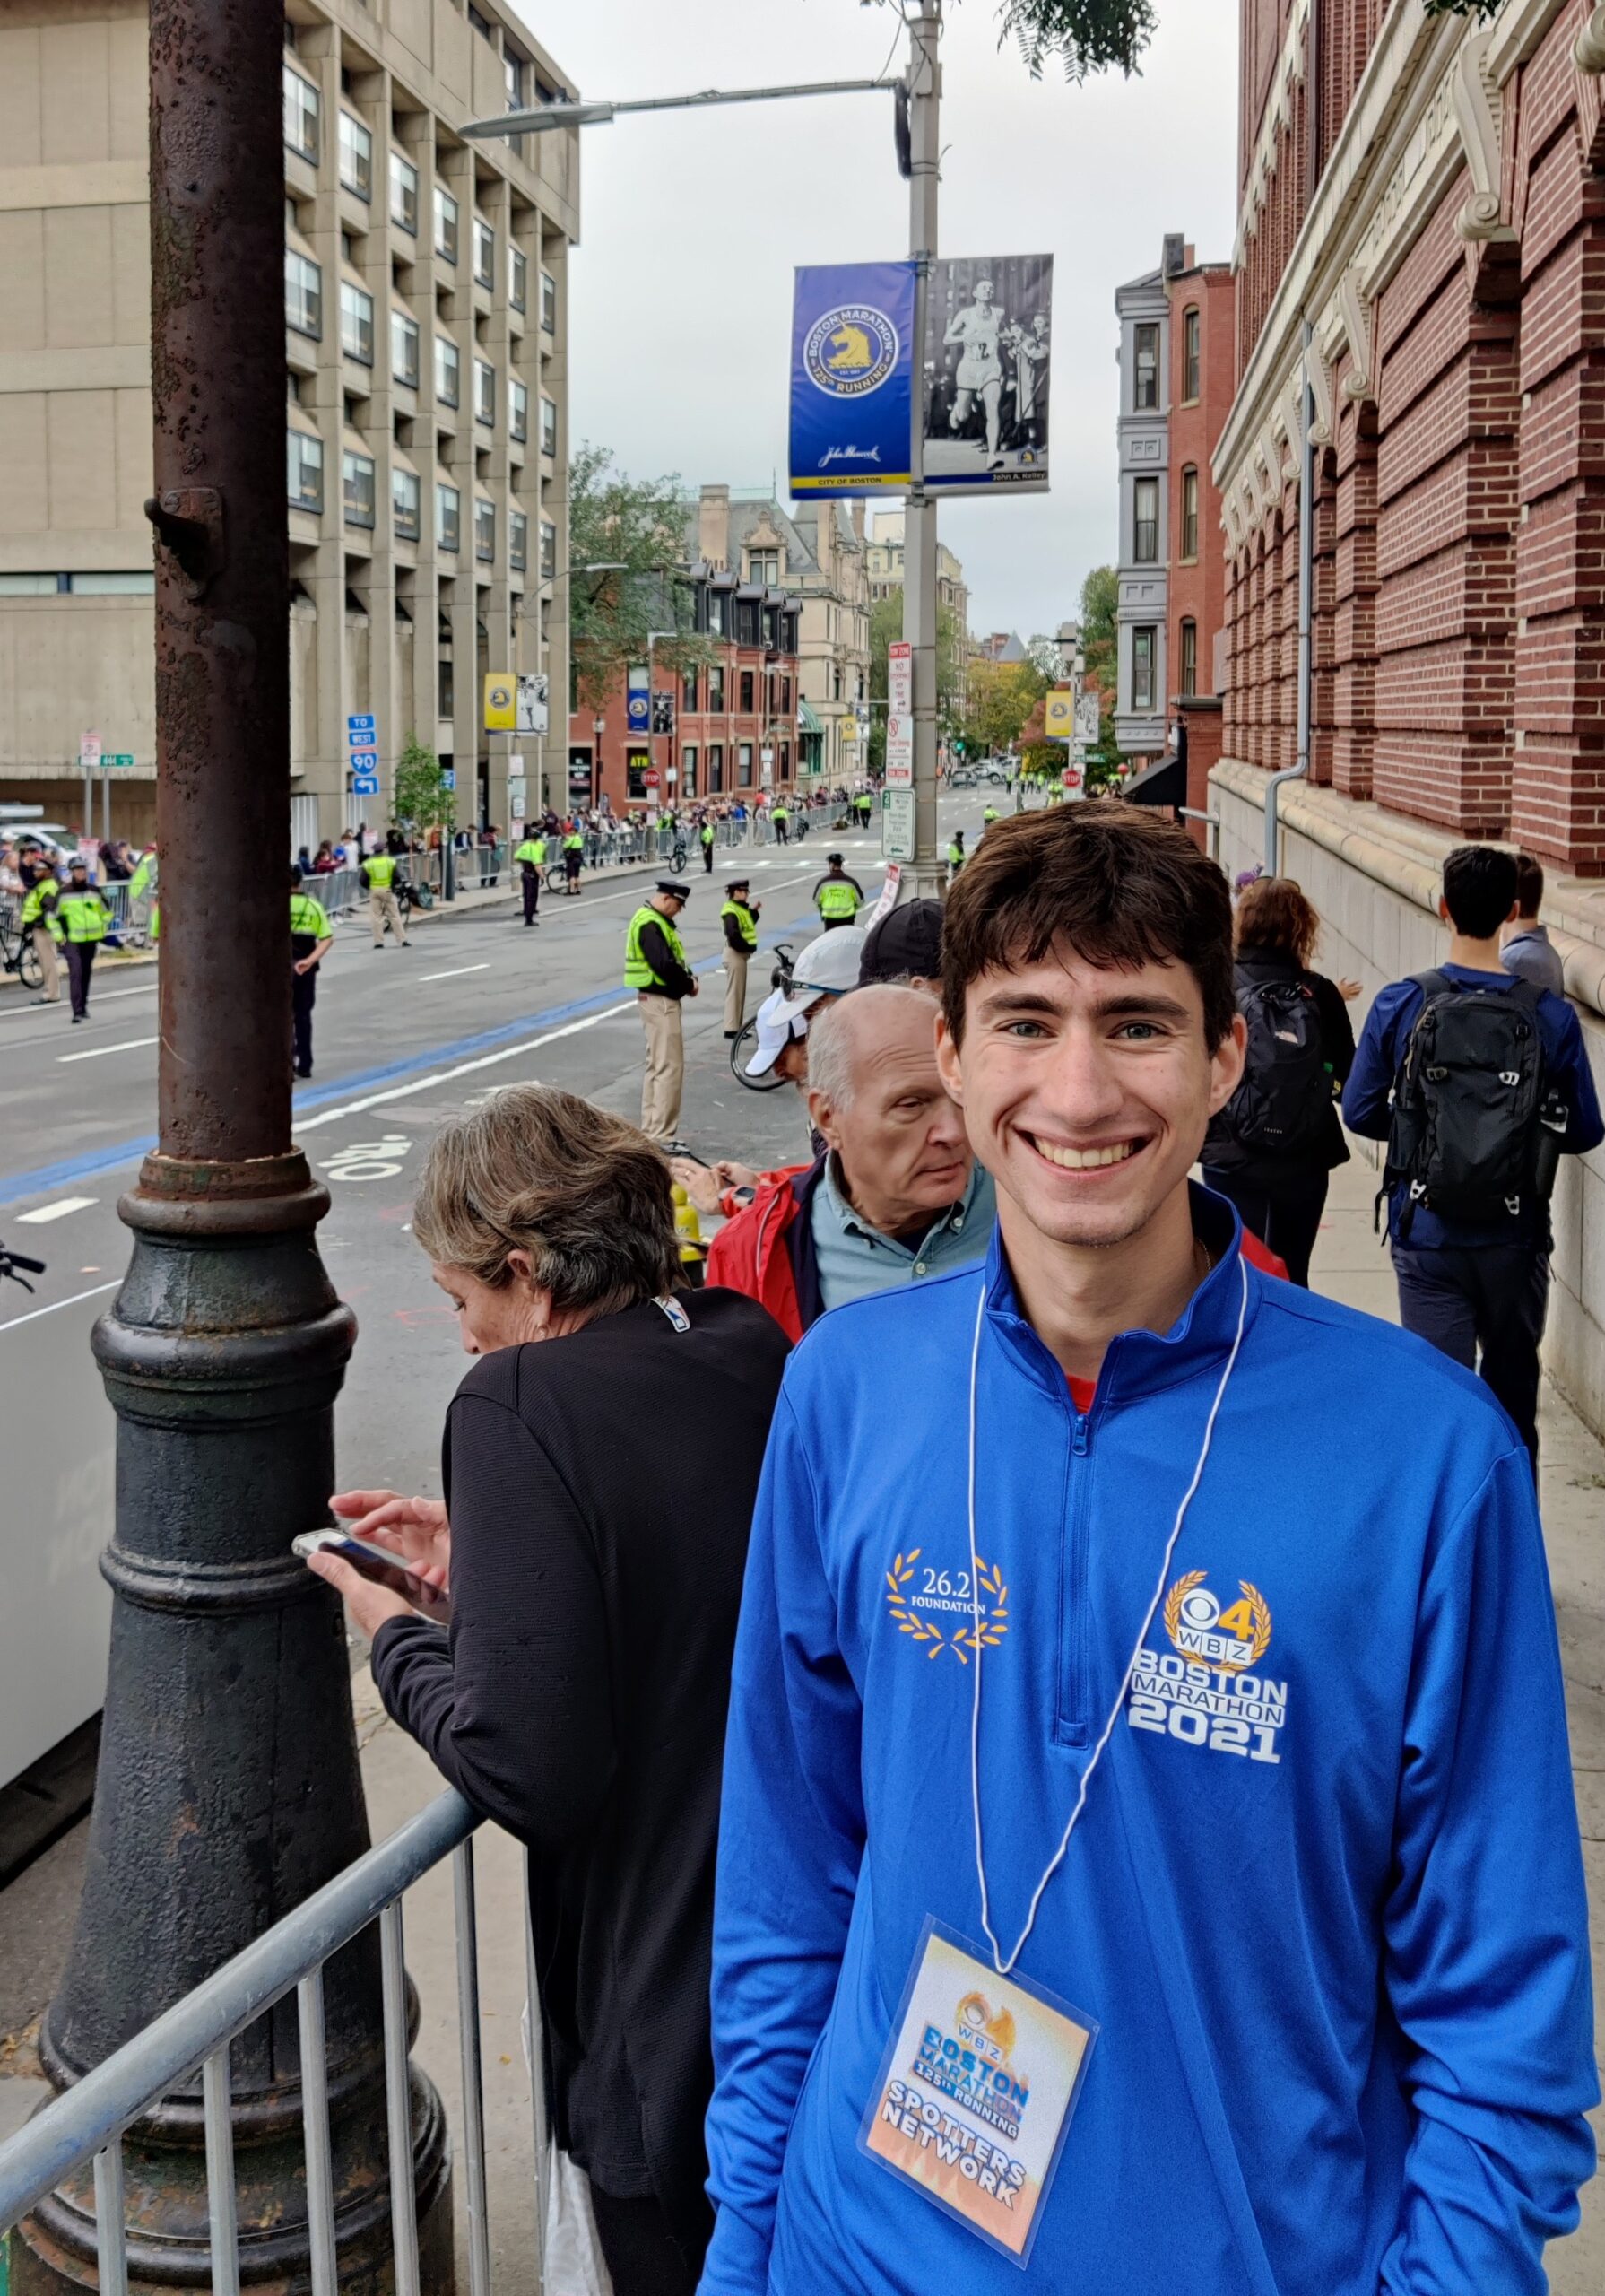 HHS students serve as spotters for Boston Marathon